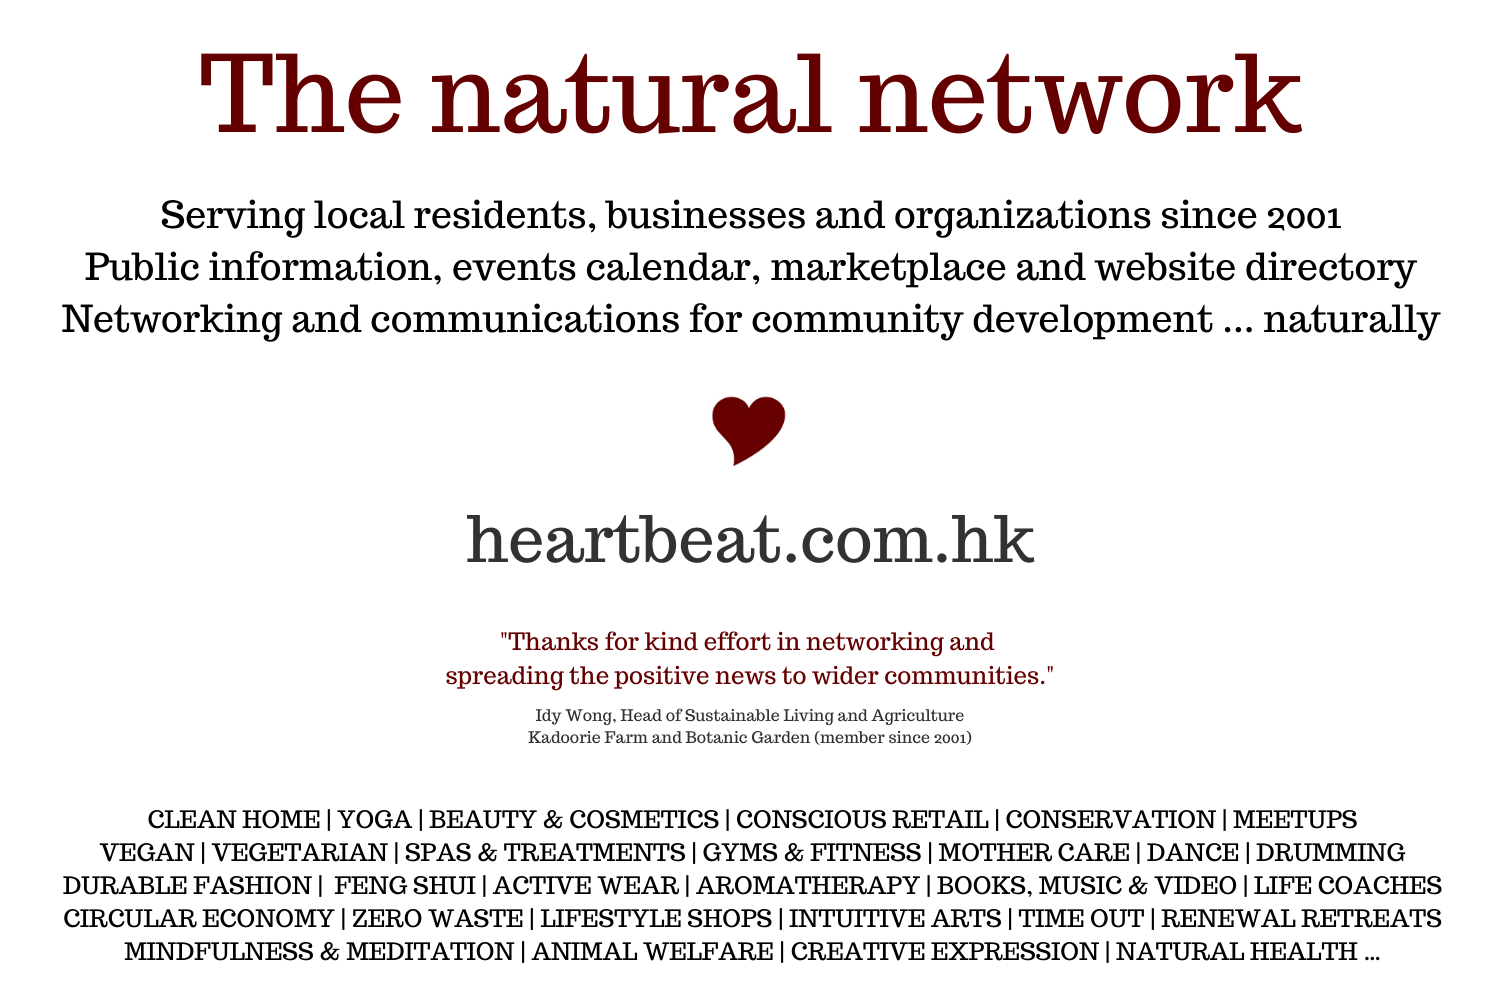 HK heartbeat -- the natural network: listen to your own heartbeat